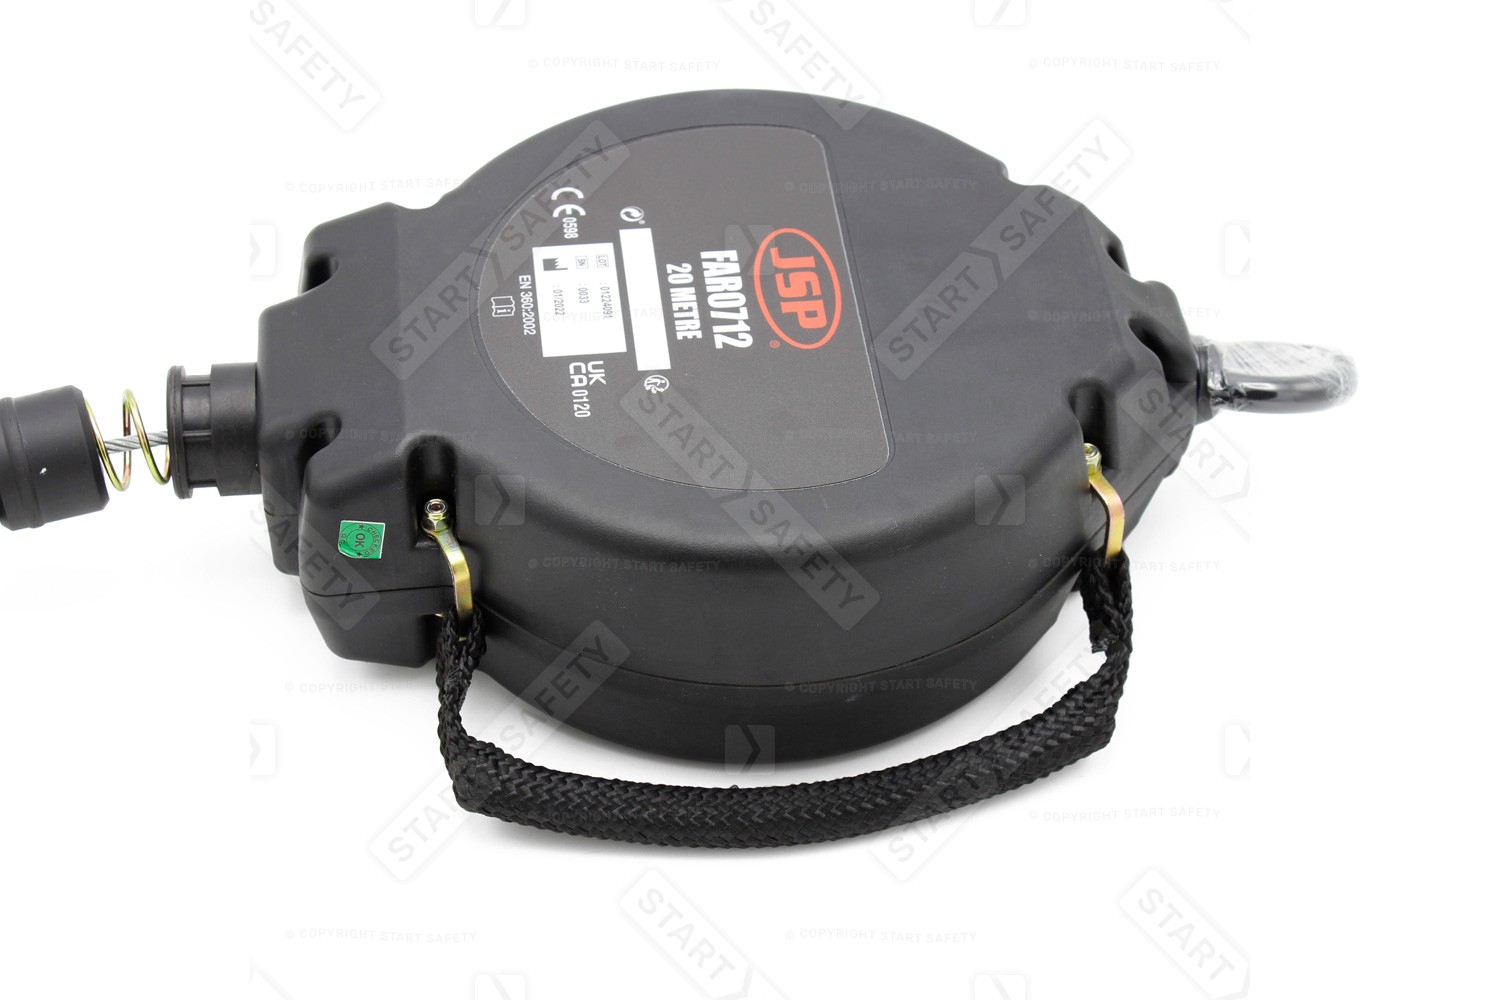 JSP FAR0712 20m Self-Retractable Lifeline With Ultra Durable Casing And No Winch